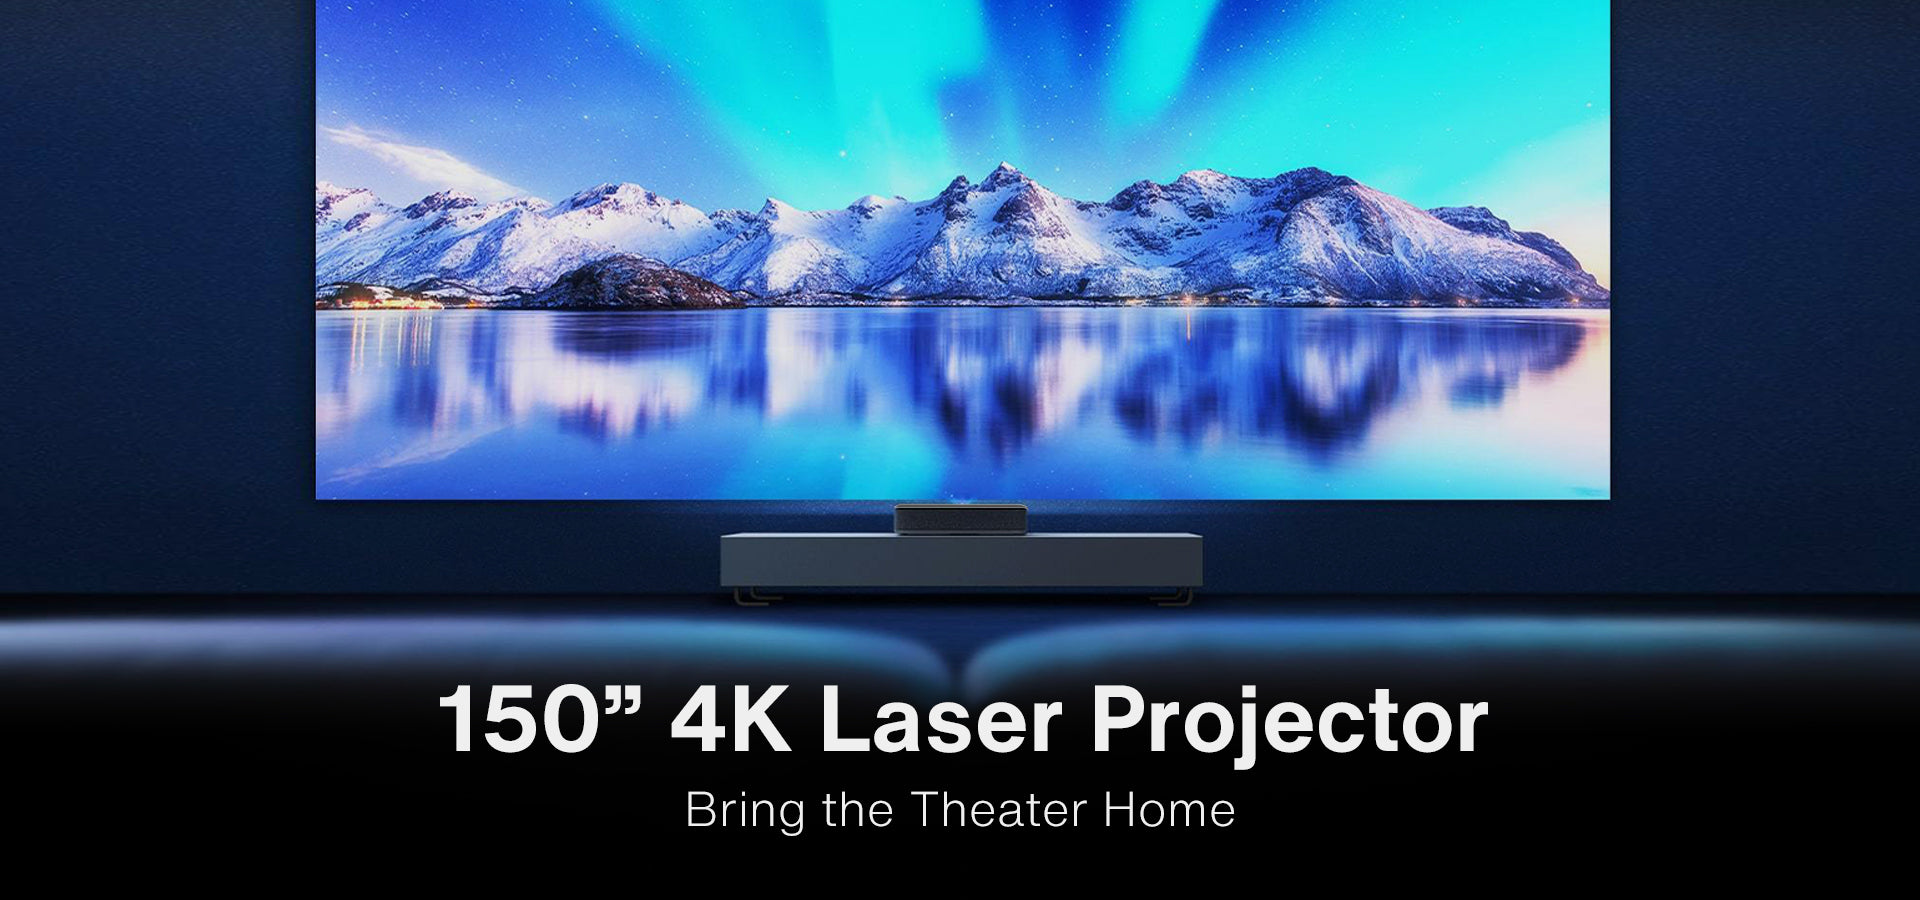 150'' 4K Laser Projector bring the theater home